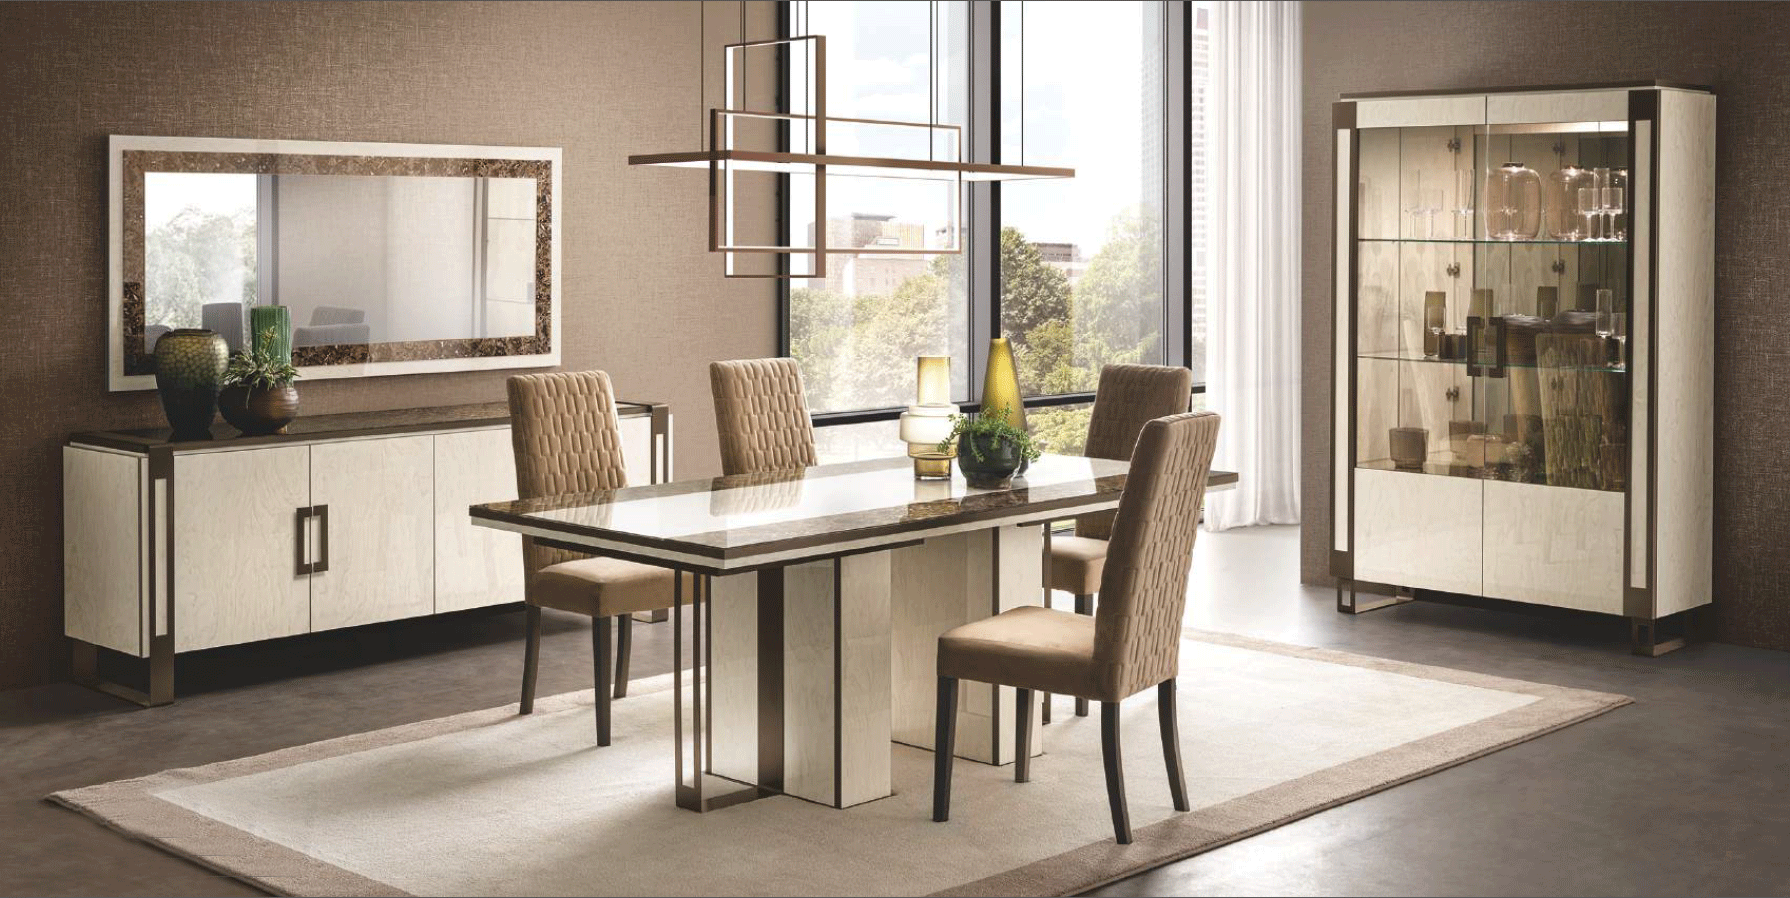 Brands Camel Modum Collection, Italy Poesia Dining room Additional items